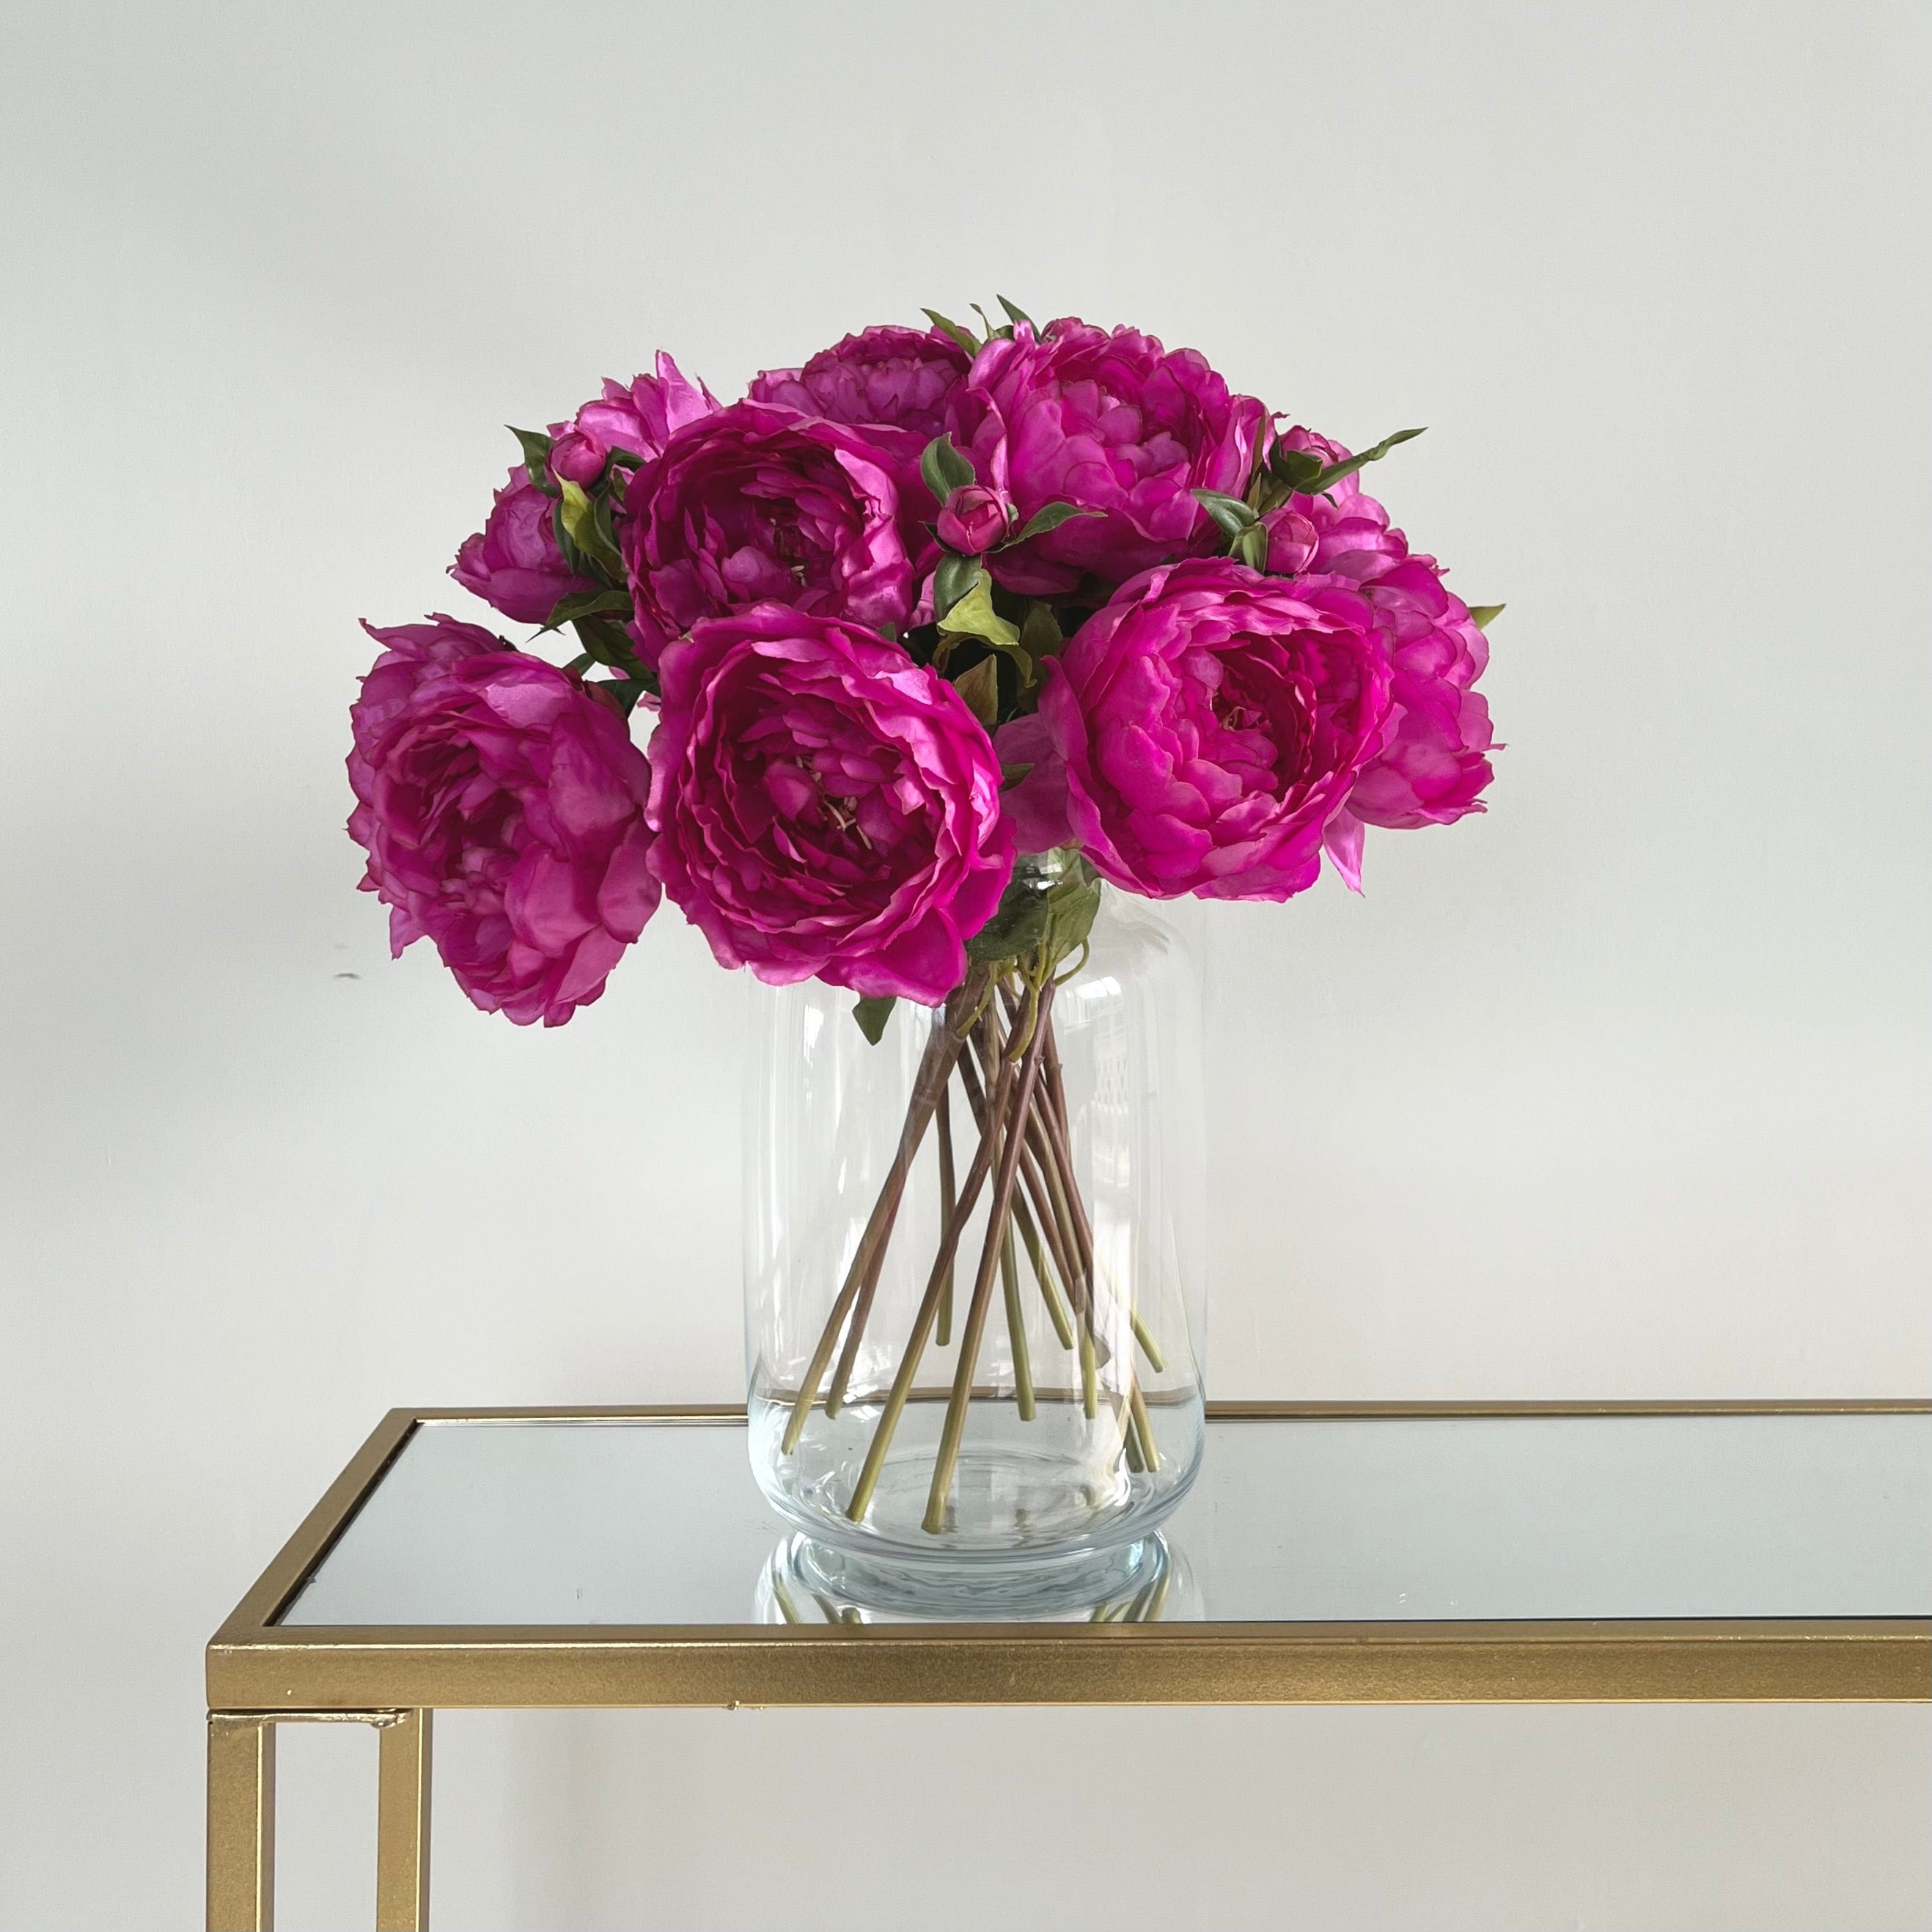 Luxury Lifelike Realistic Artificial Fabric Silk Blooms with Foliage Buy Online from The Faux Flower Company | 12 stems of Fuchsia Classic Peony ABY6043FU styled in Clear Glass Large Funnel Neck Vase ABV2253